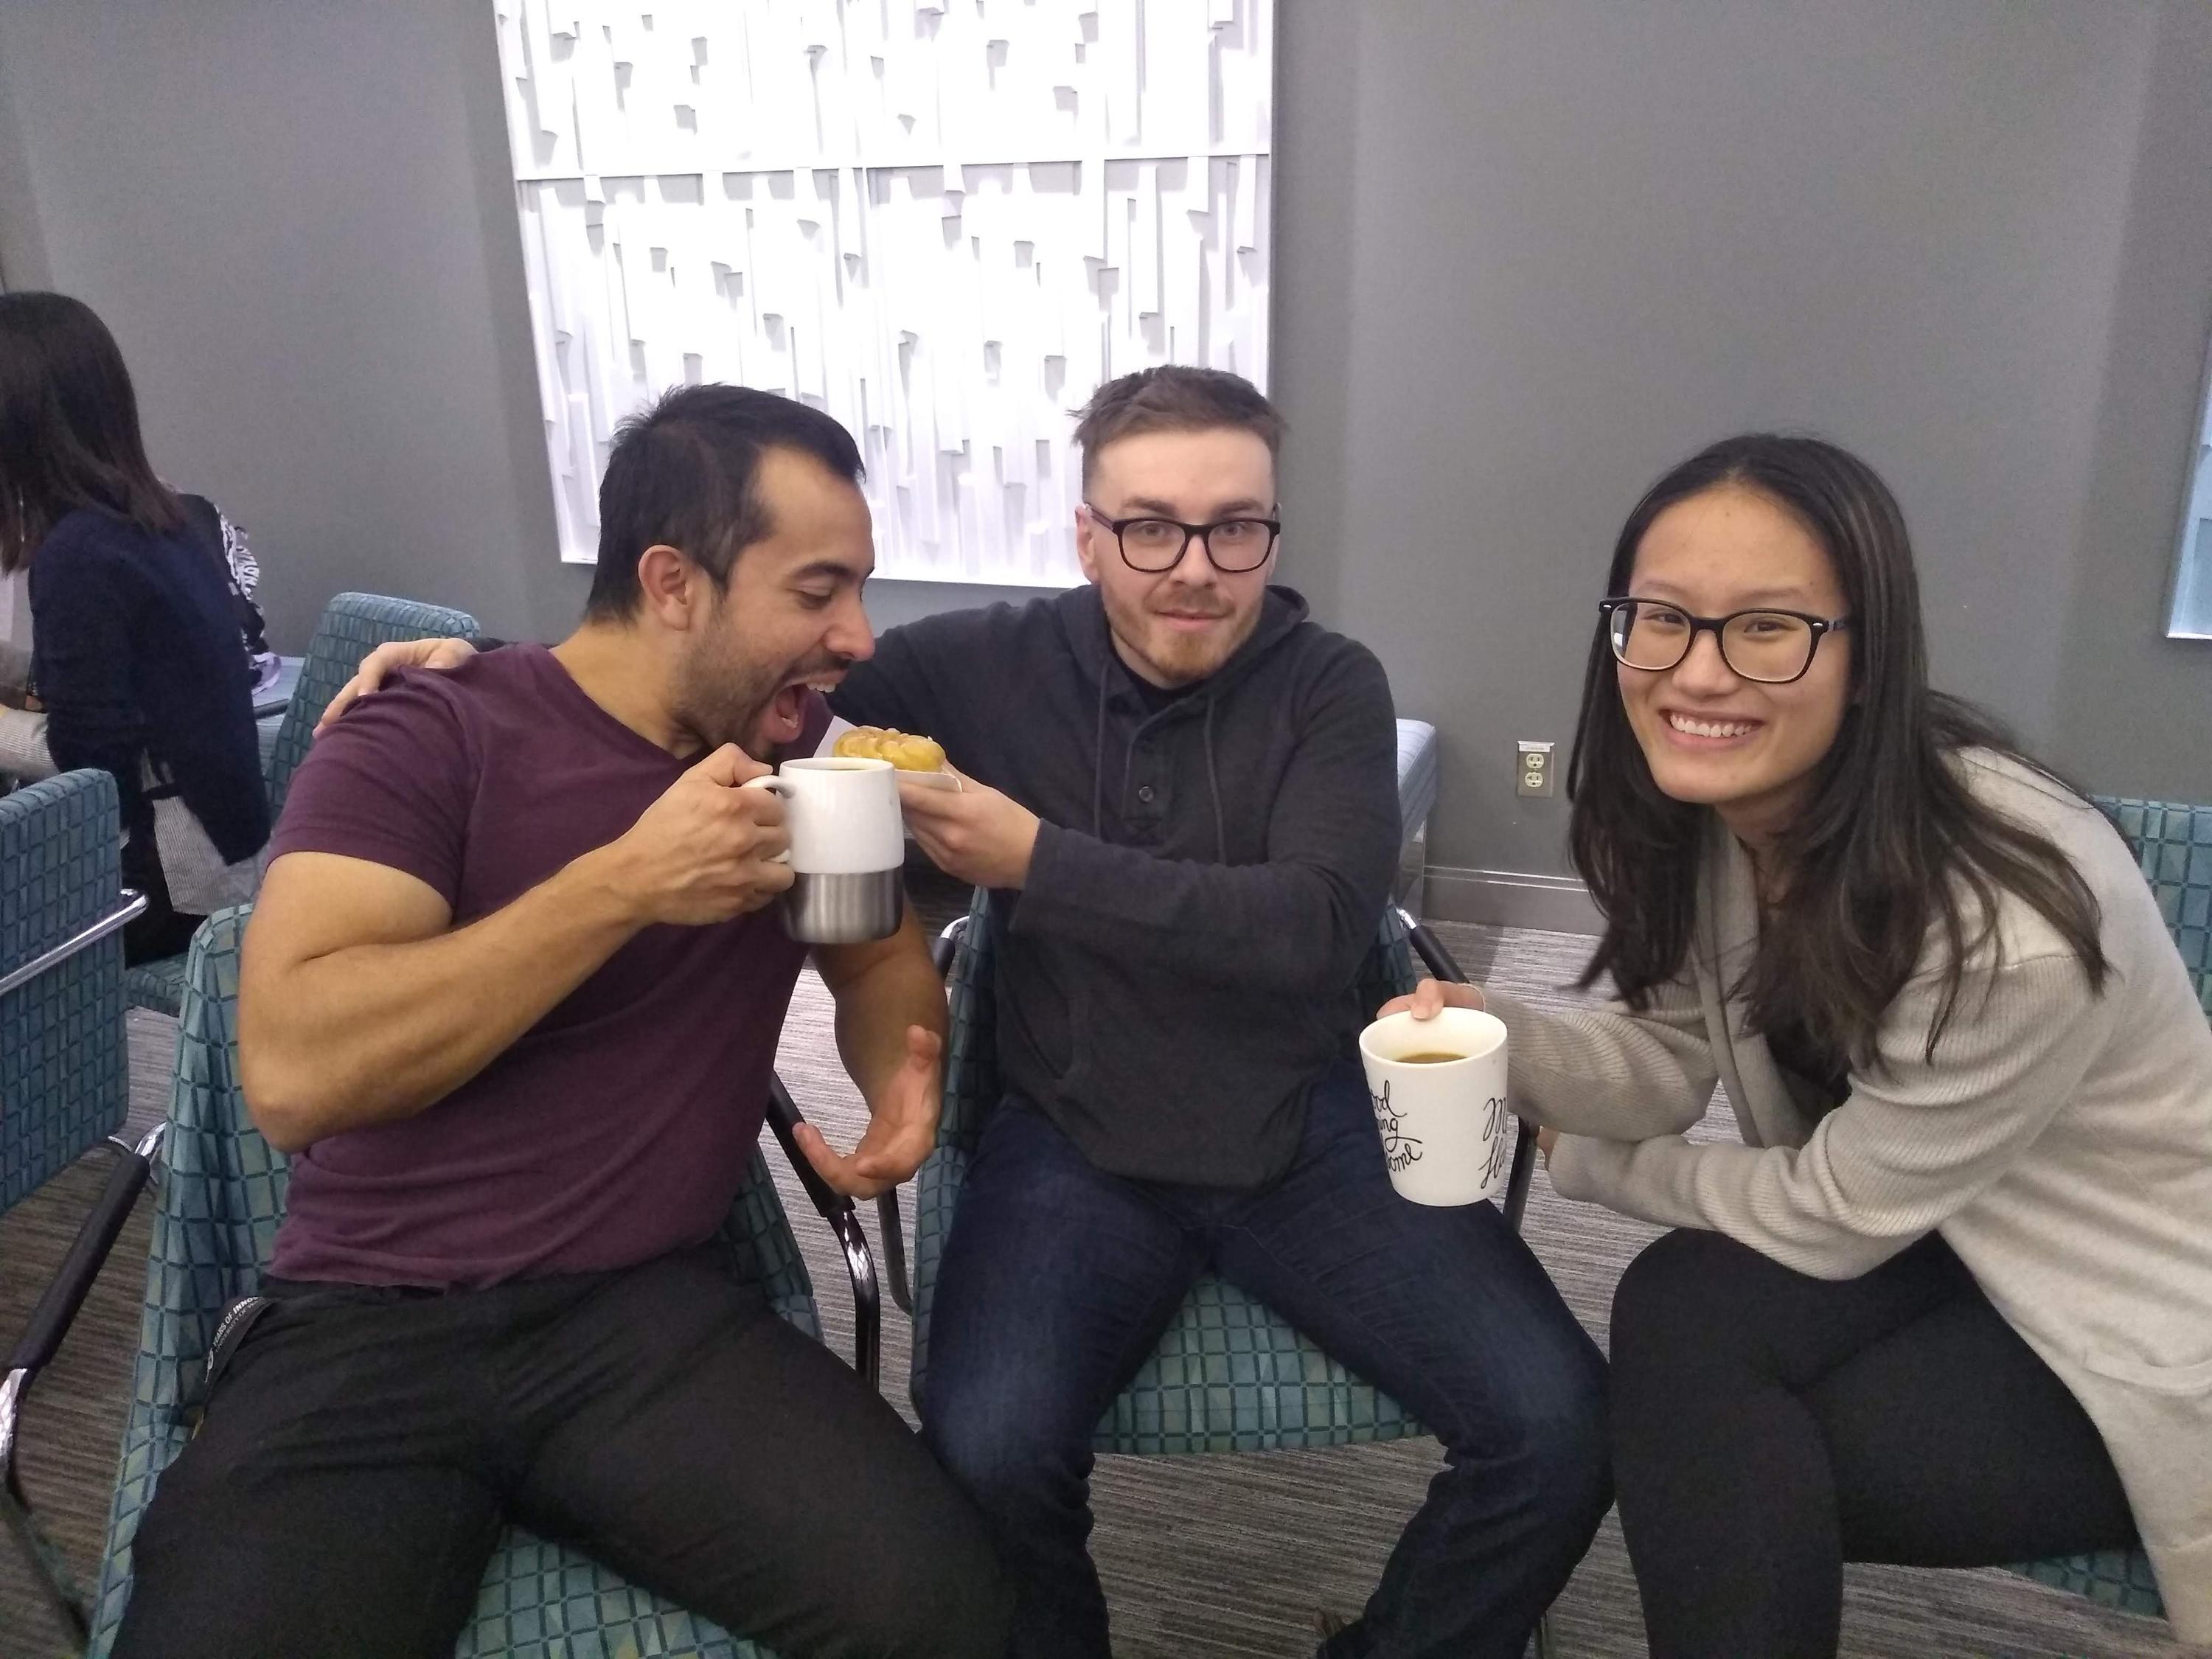 Three students sitting with coffee and donuts